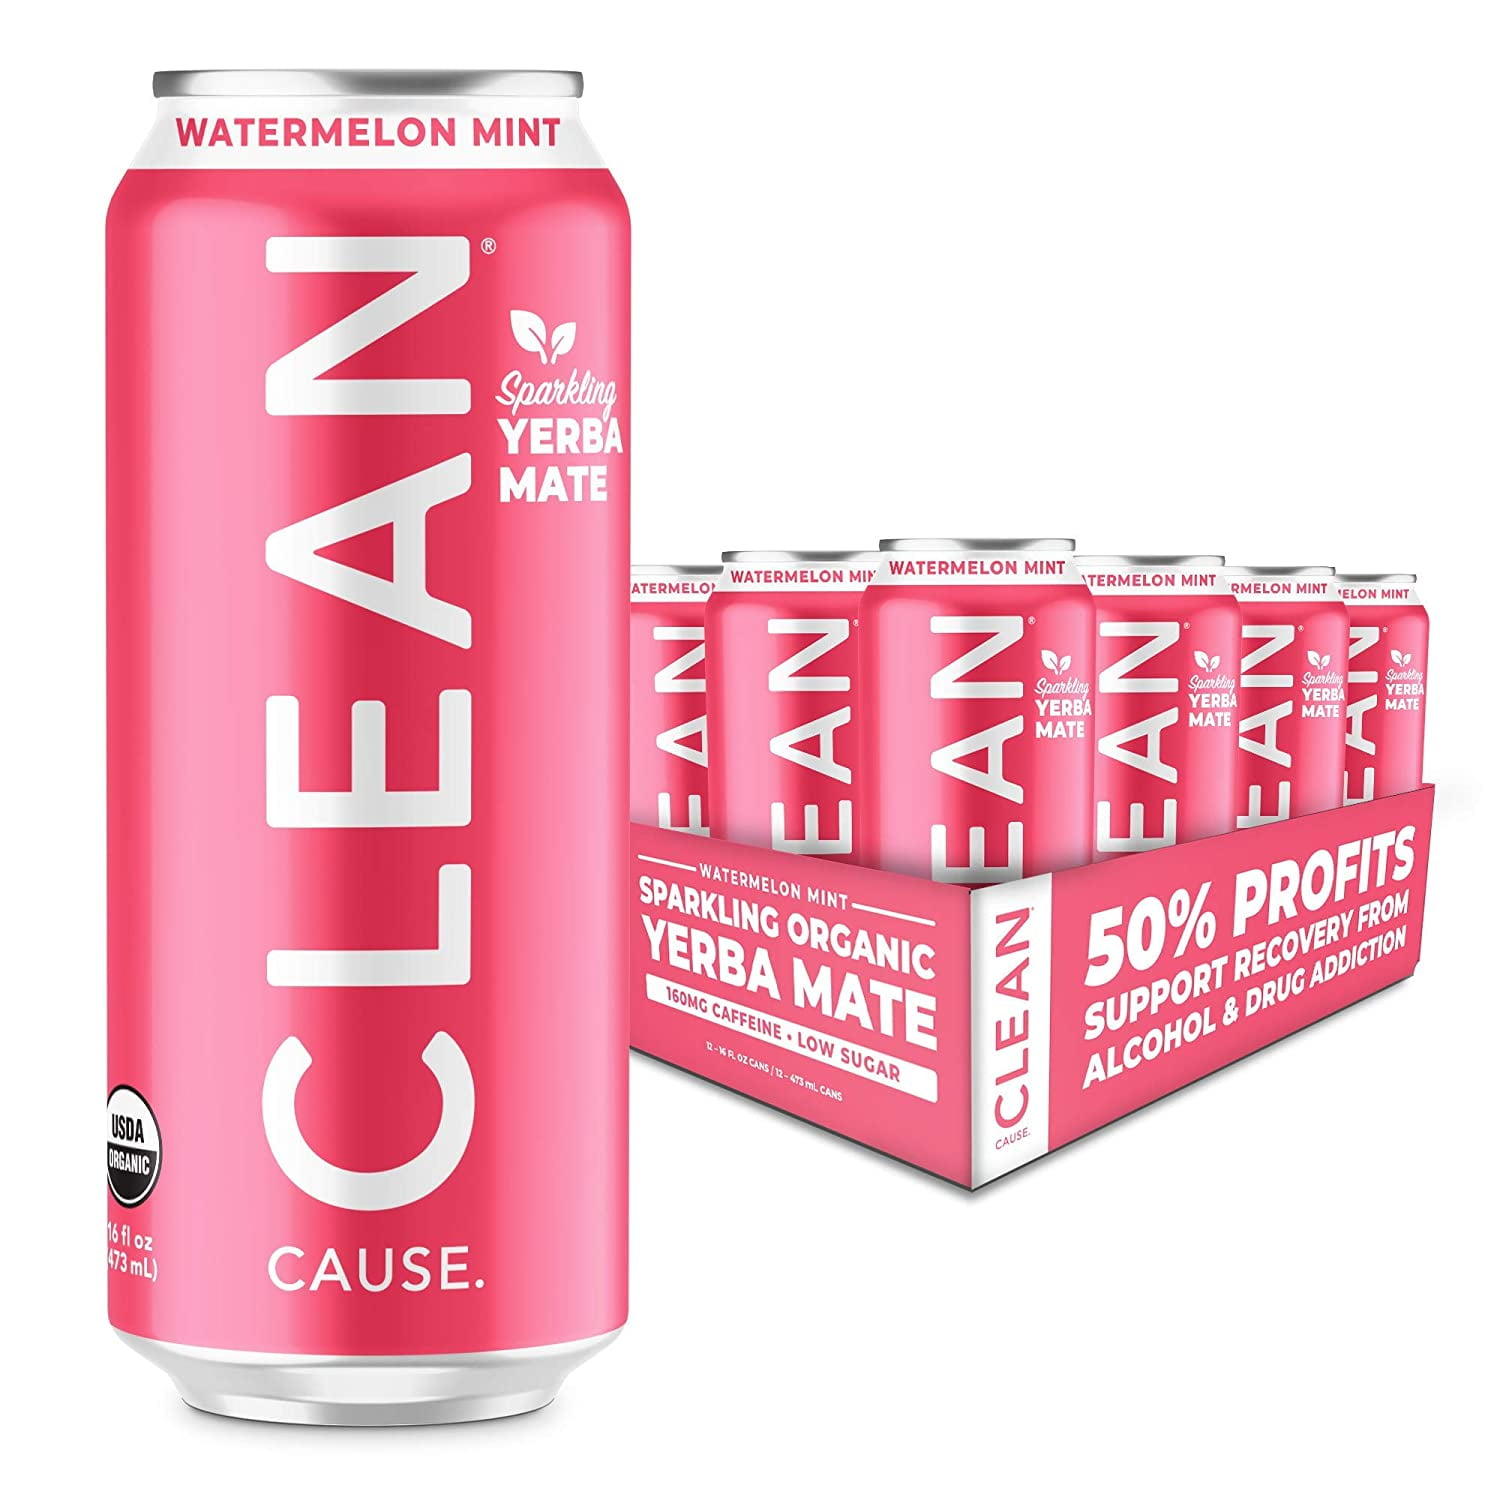 Photo 1 of (12 Cans) CLEAN Cause Watermelon Mint Organic Sparkling Yerba Mate Tea - Organic, Low Calorie Low Sugar (160mg Caffeine), 16 Fl Oz - 50 PROFITS SUPPORT RECOVERY FROM ALCOHOL DRUG ADDICTION - exp 01/29/2025